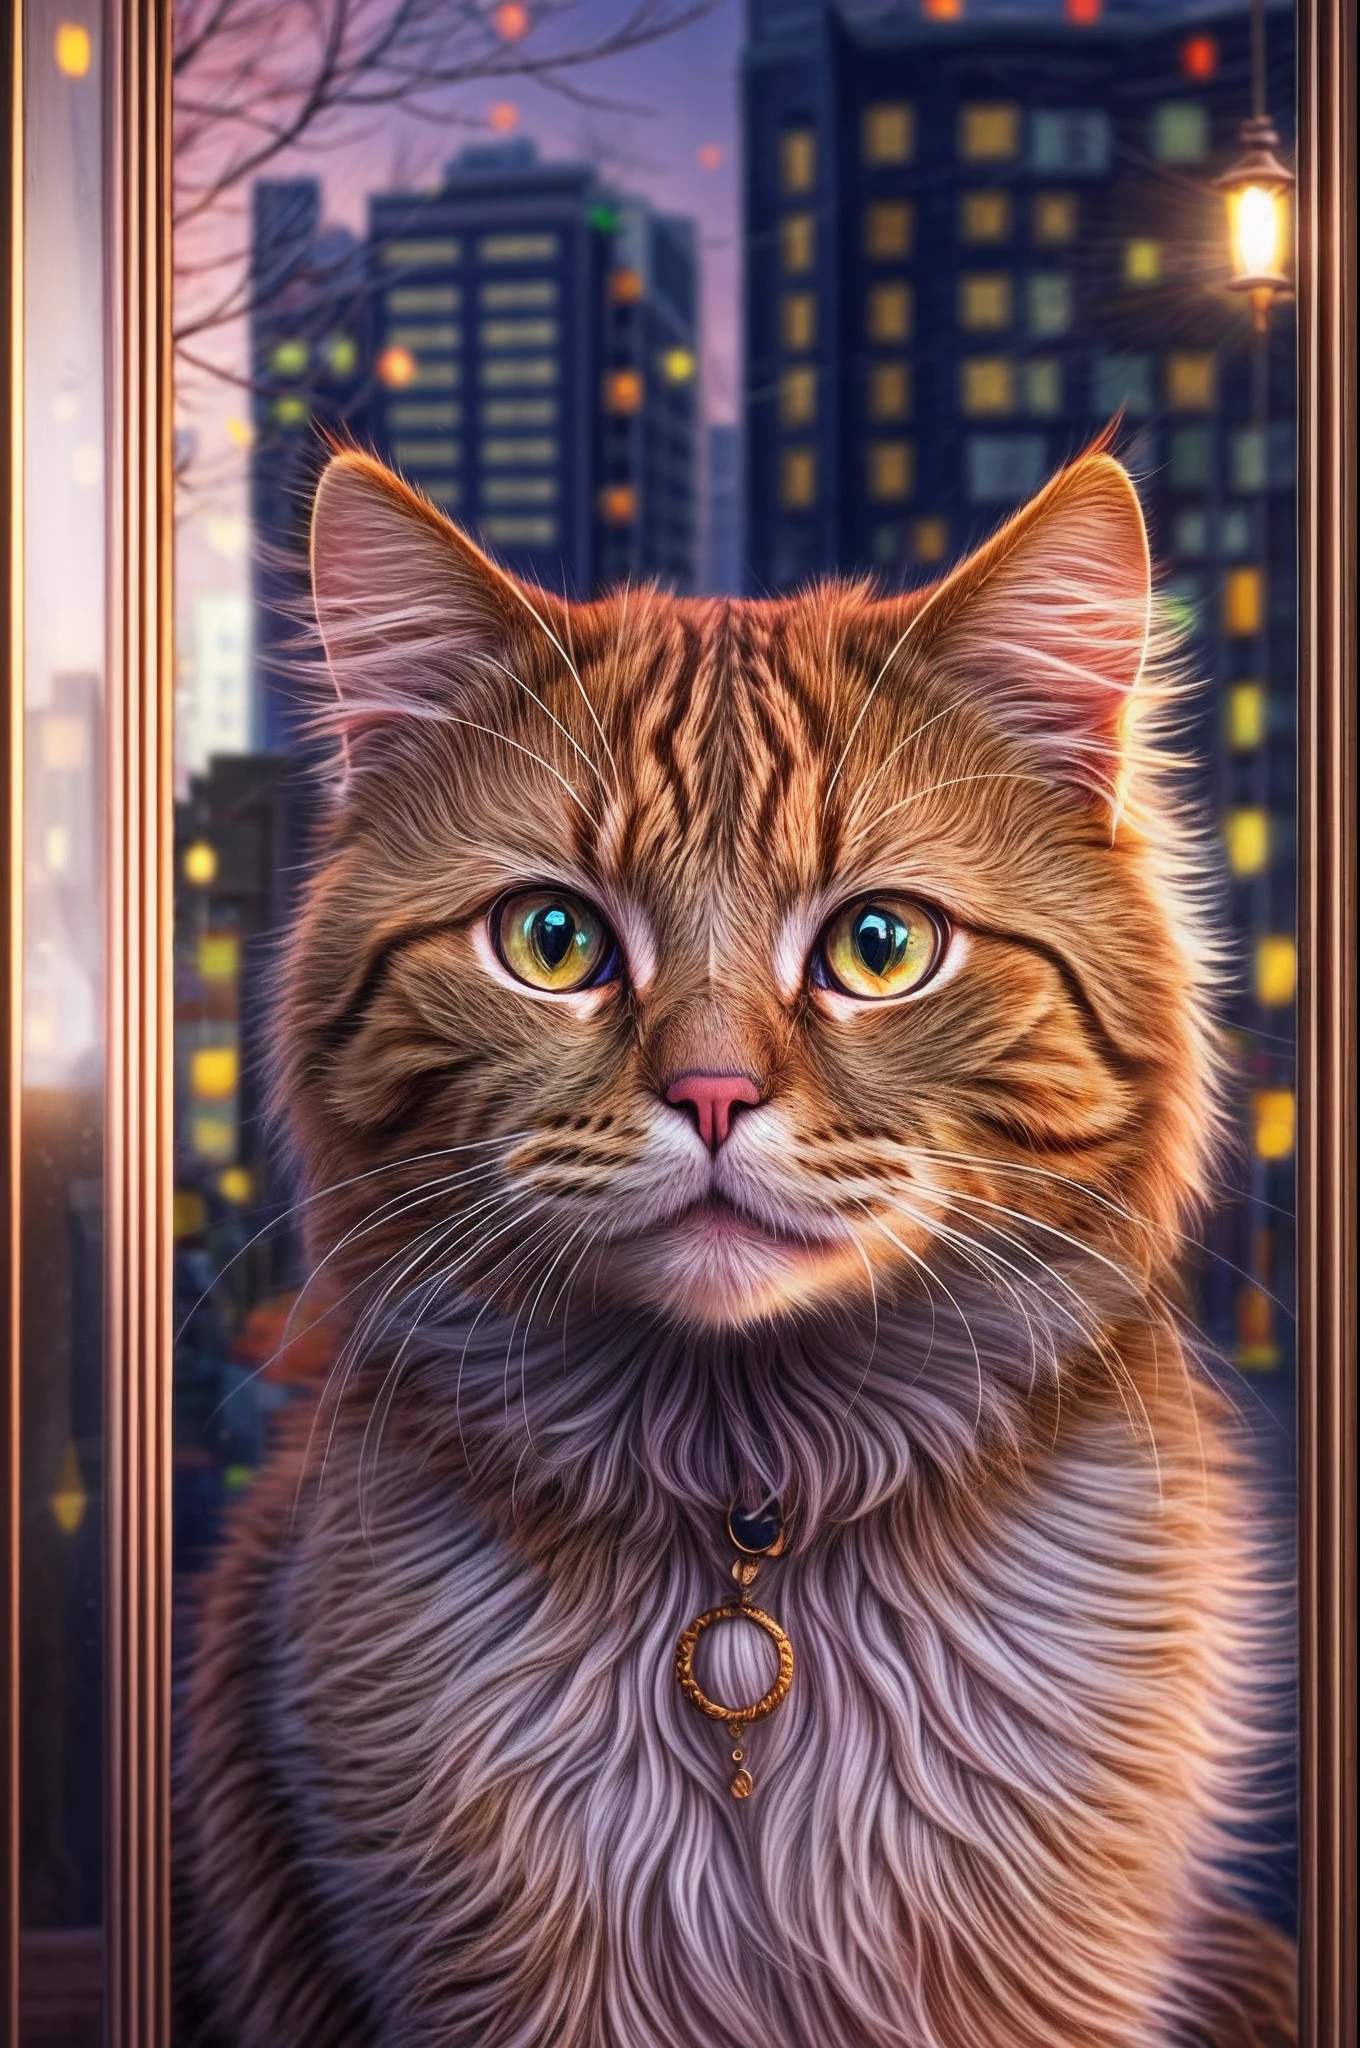 A beautiful, gentle-eyed ginger cat bathed in the twilight's soft prism within the city.